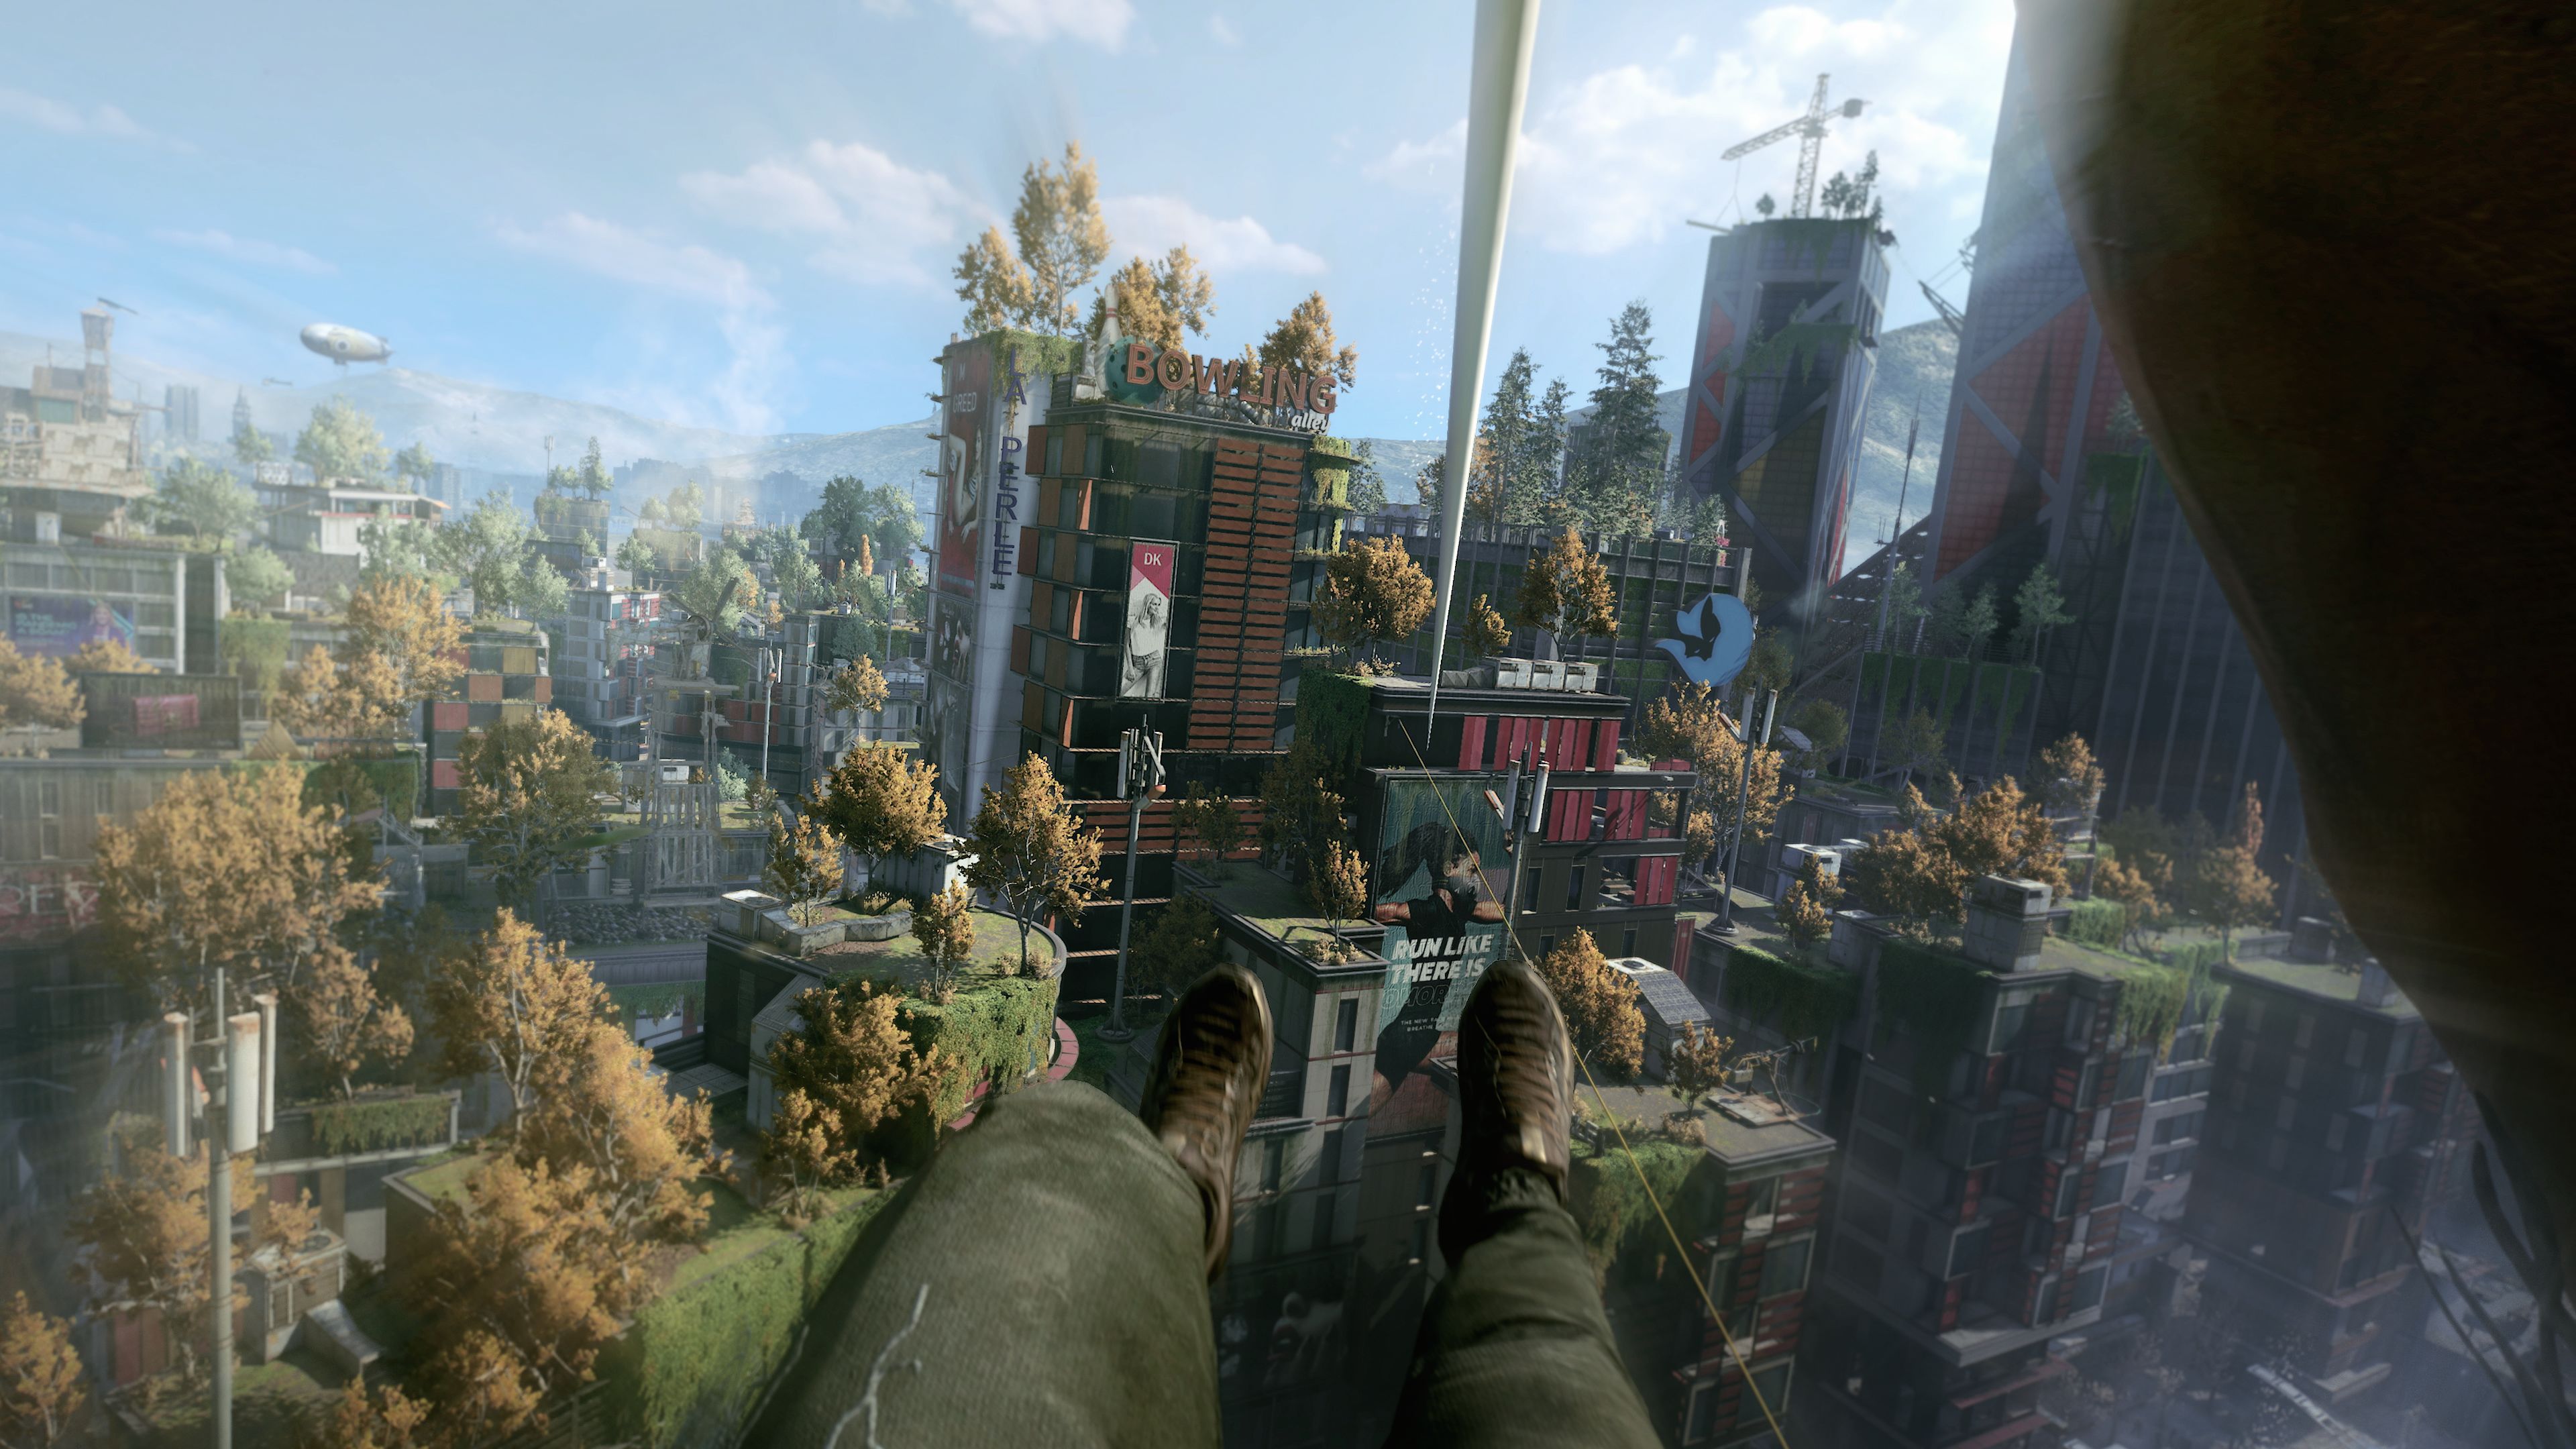 dying light only has one save